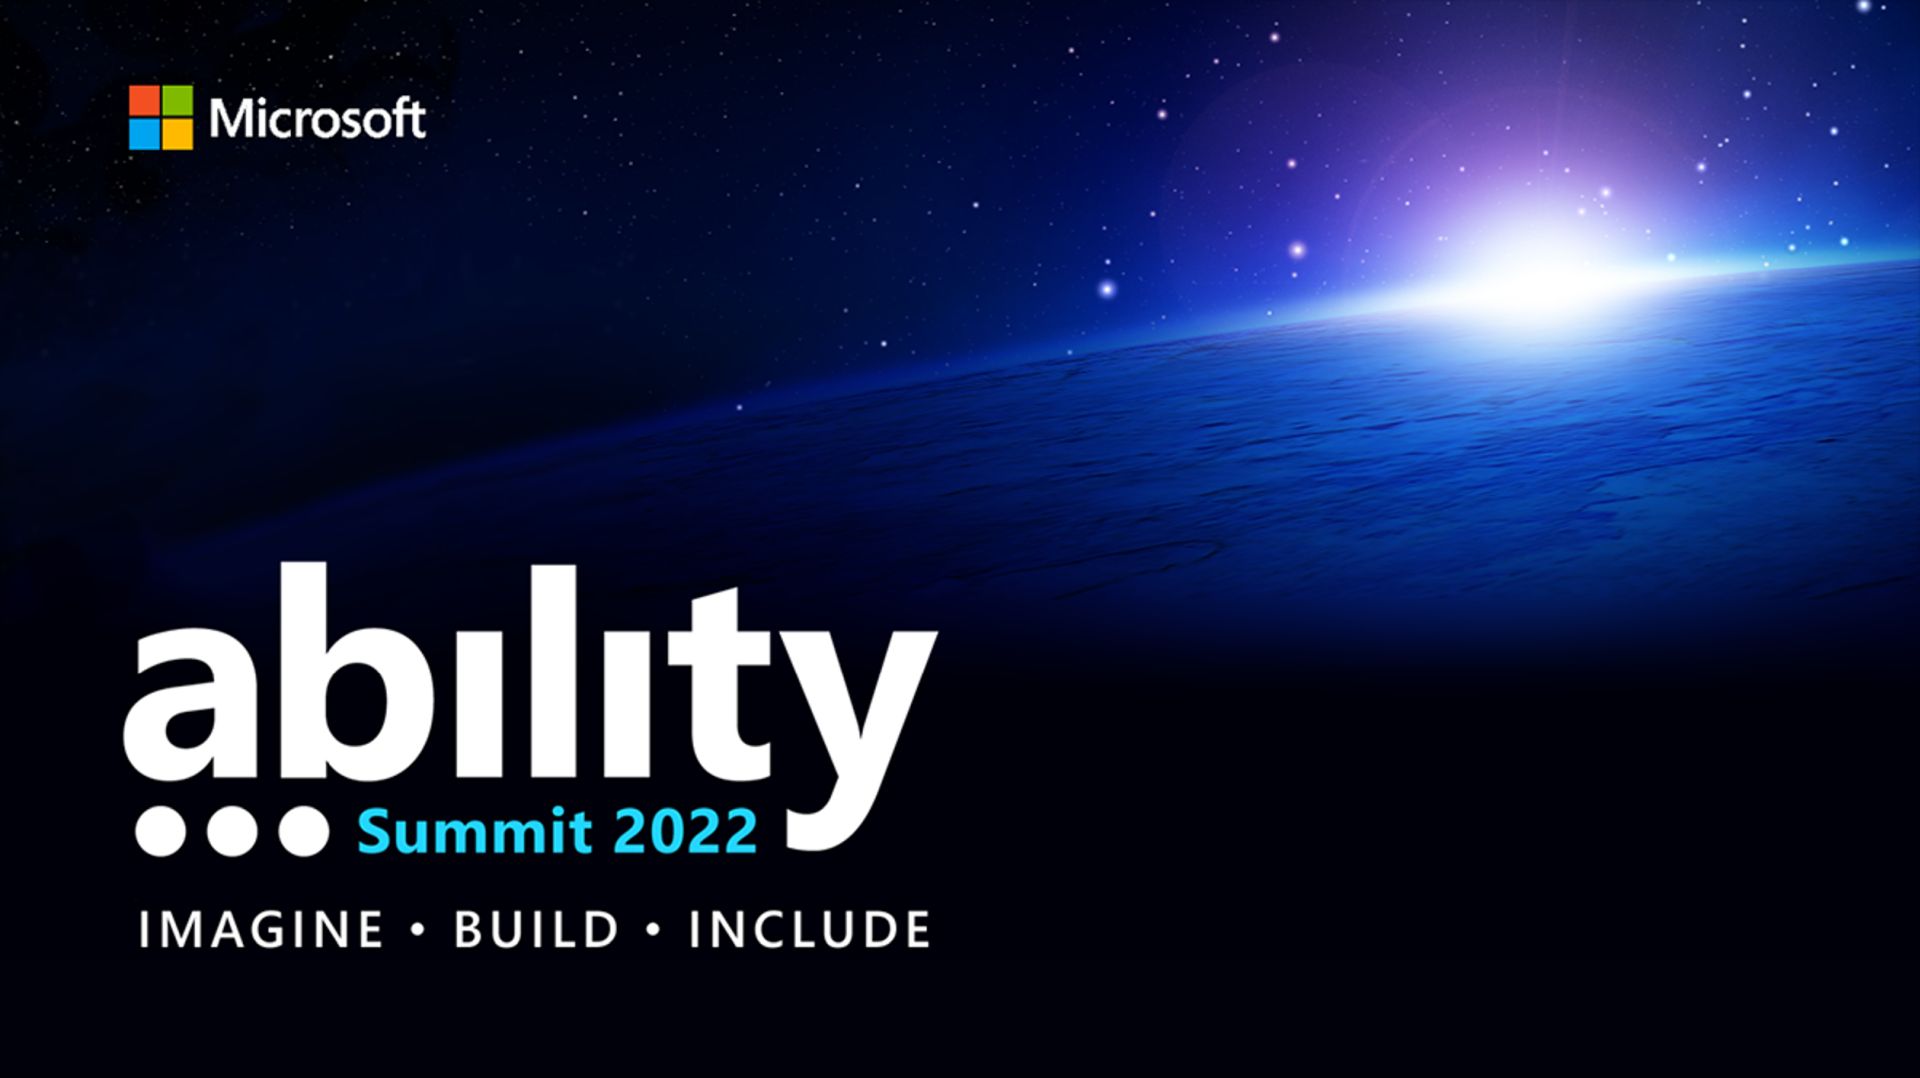 Ability Summit logo with the words Imagine, Build, Include with a background image of a night sky over planet earth from space.